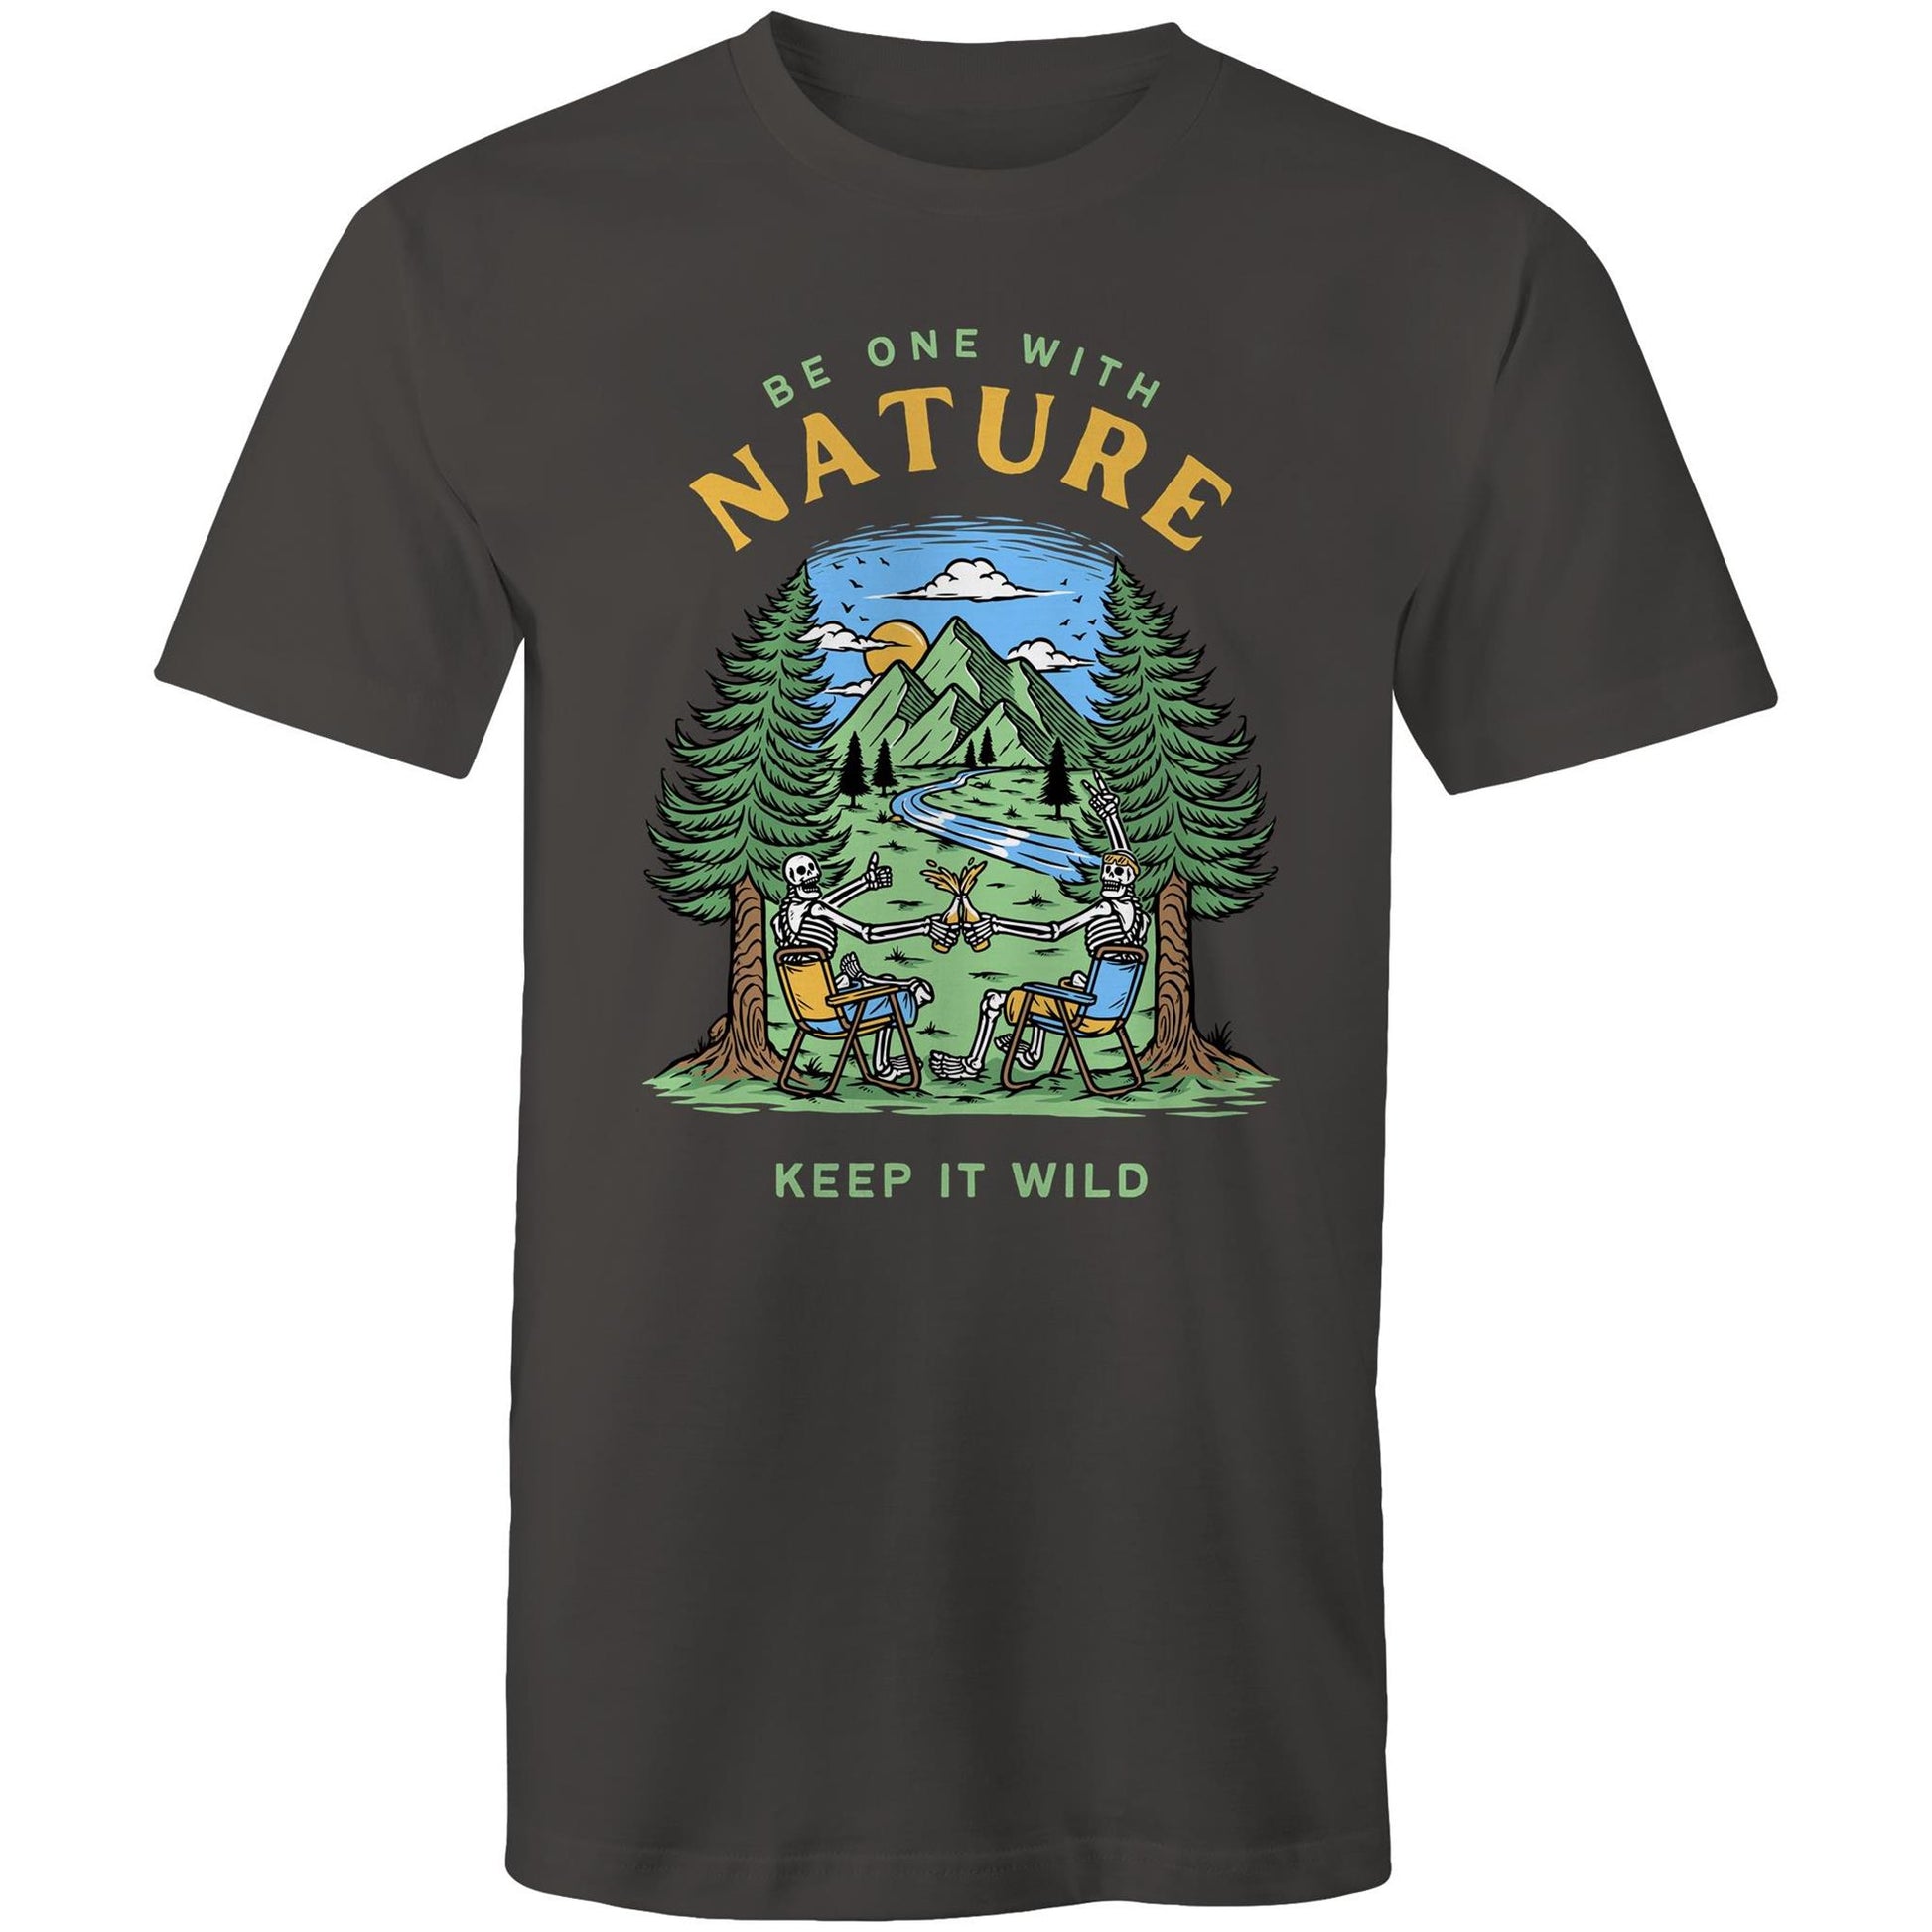 Be One With Nature, Skeleton - Mens T-Shirt Charcoal Mens T-shirt Environment Summer